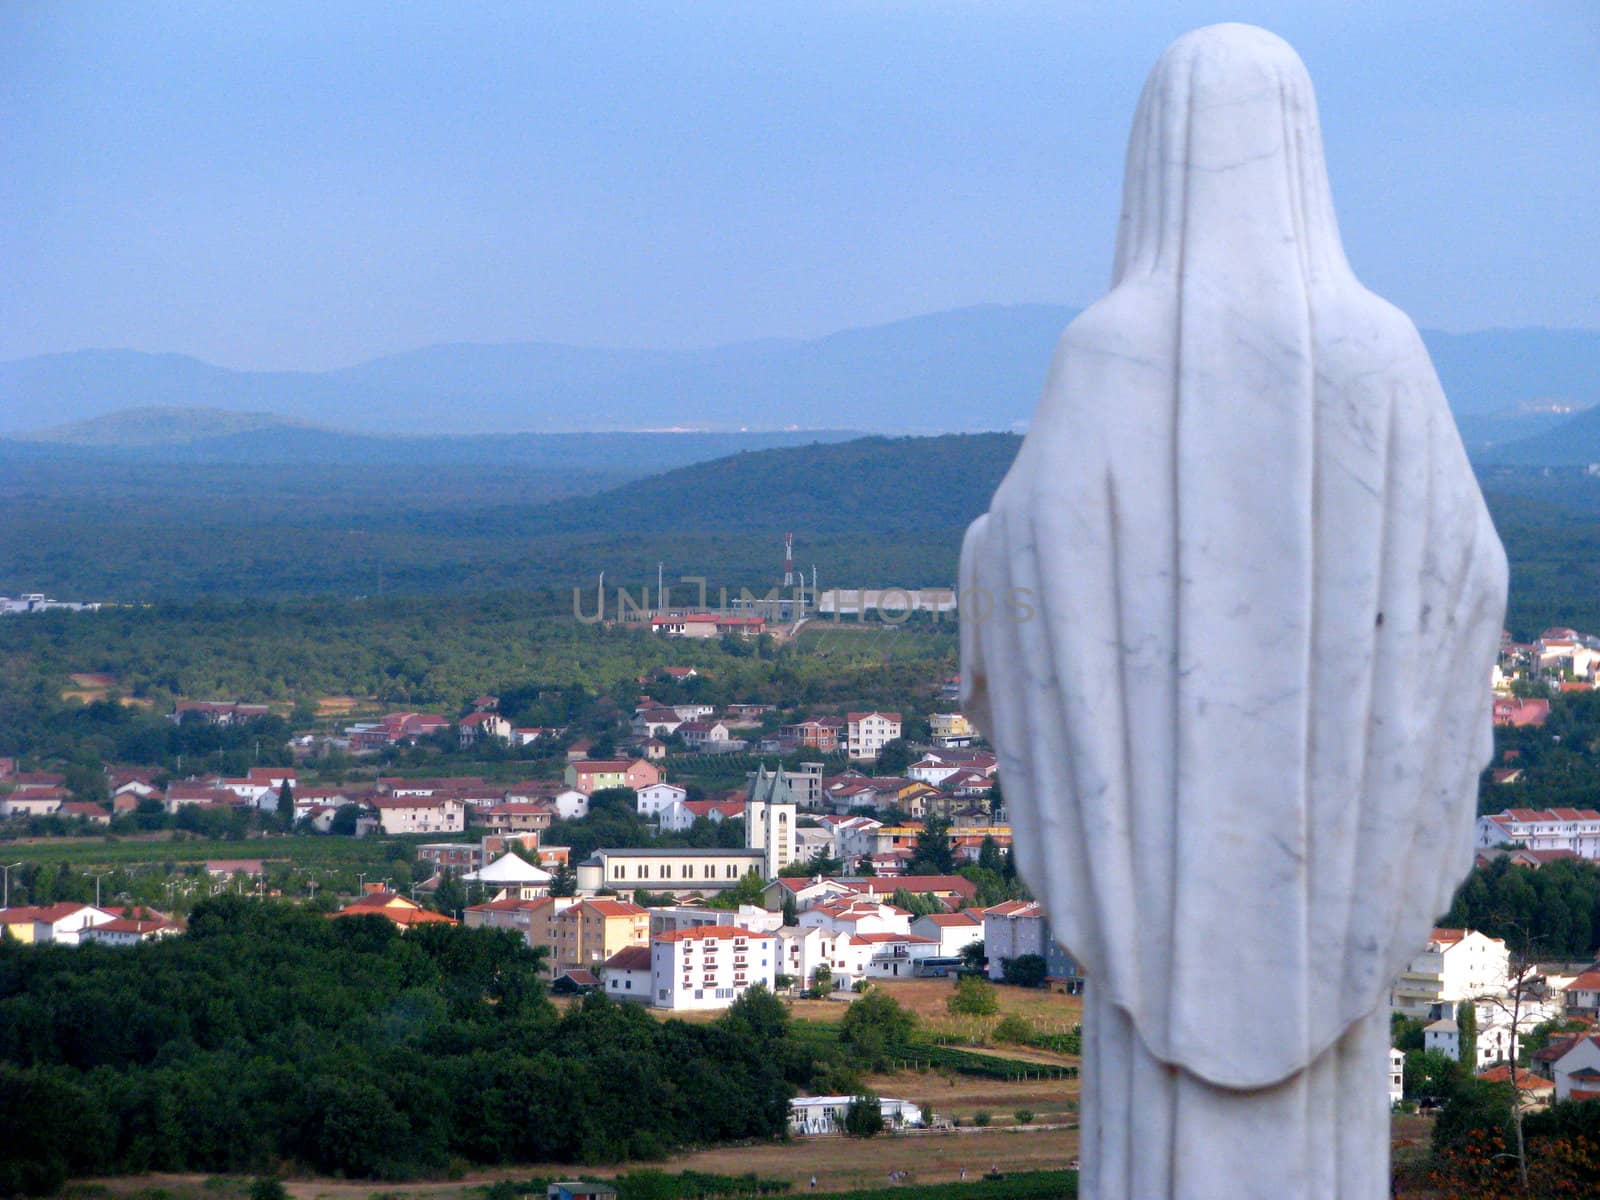 A statue of Our Lady Queen of Peace overlooking the city of Medjugorje, Bosnia - Herzegovina.